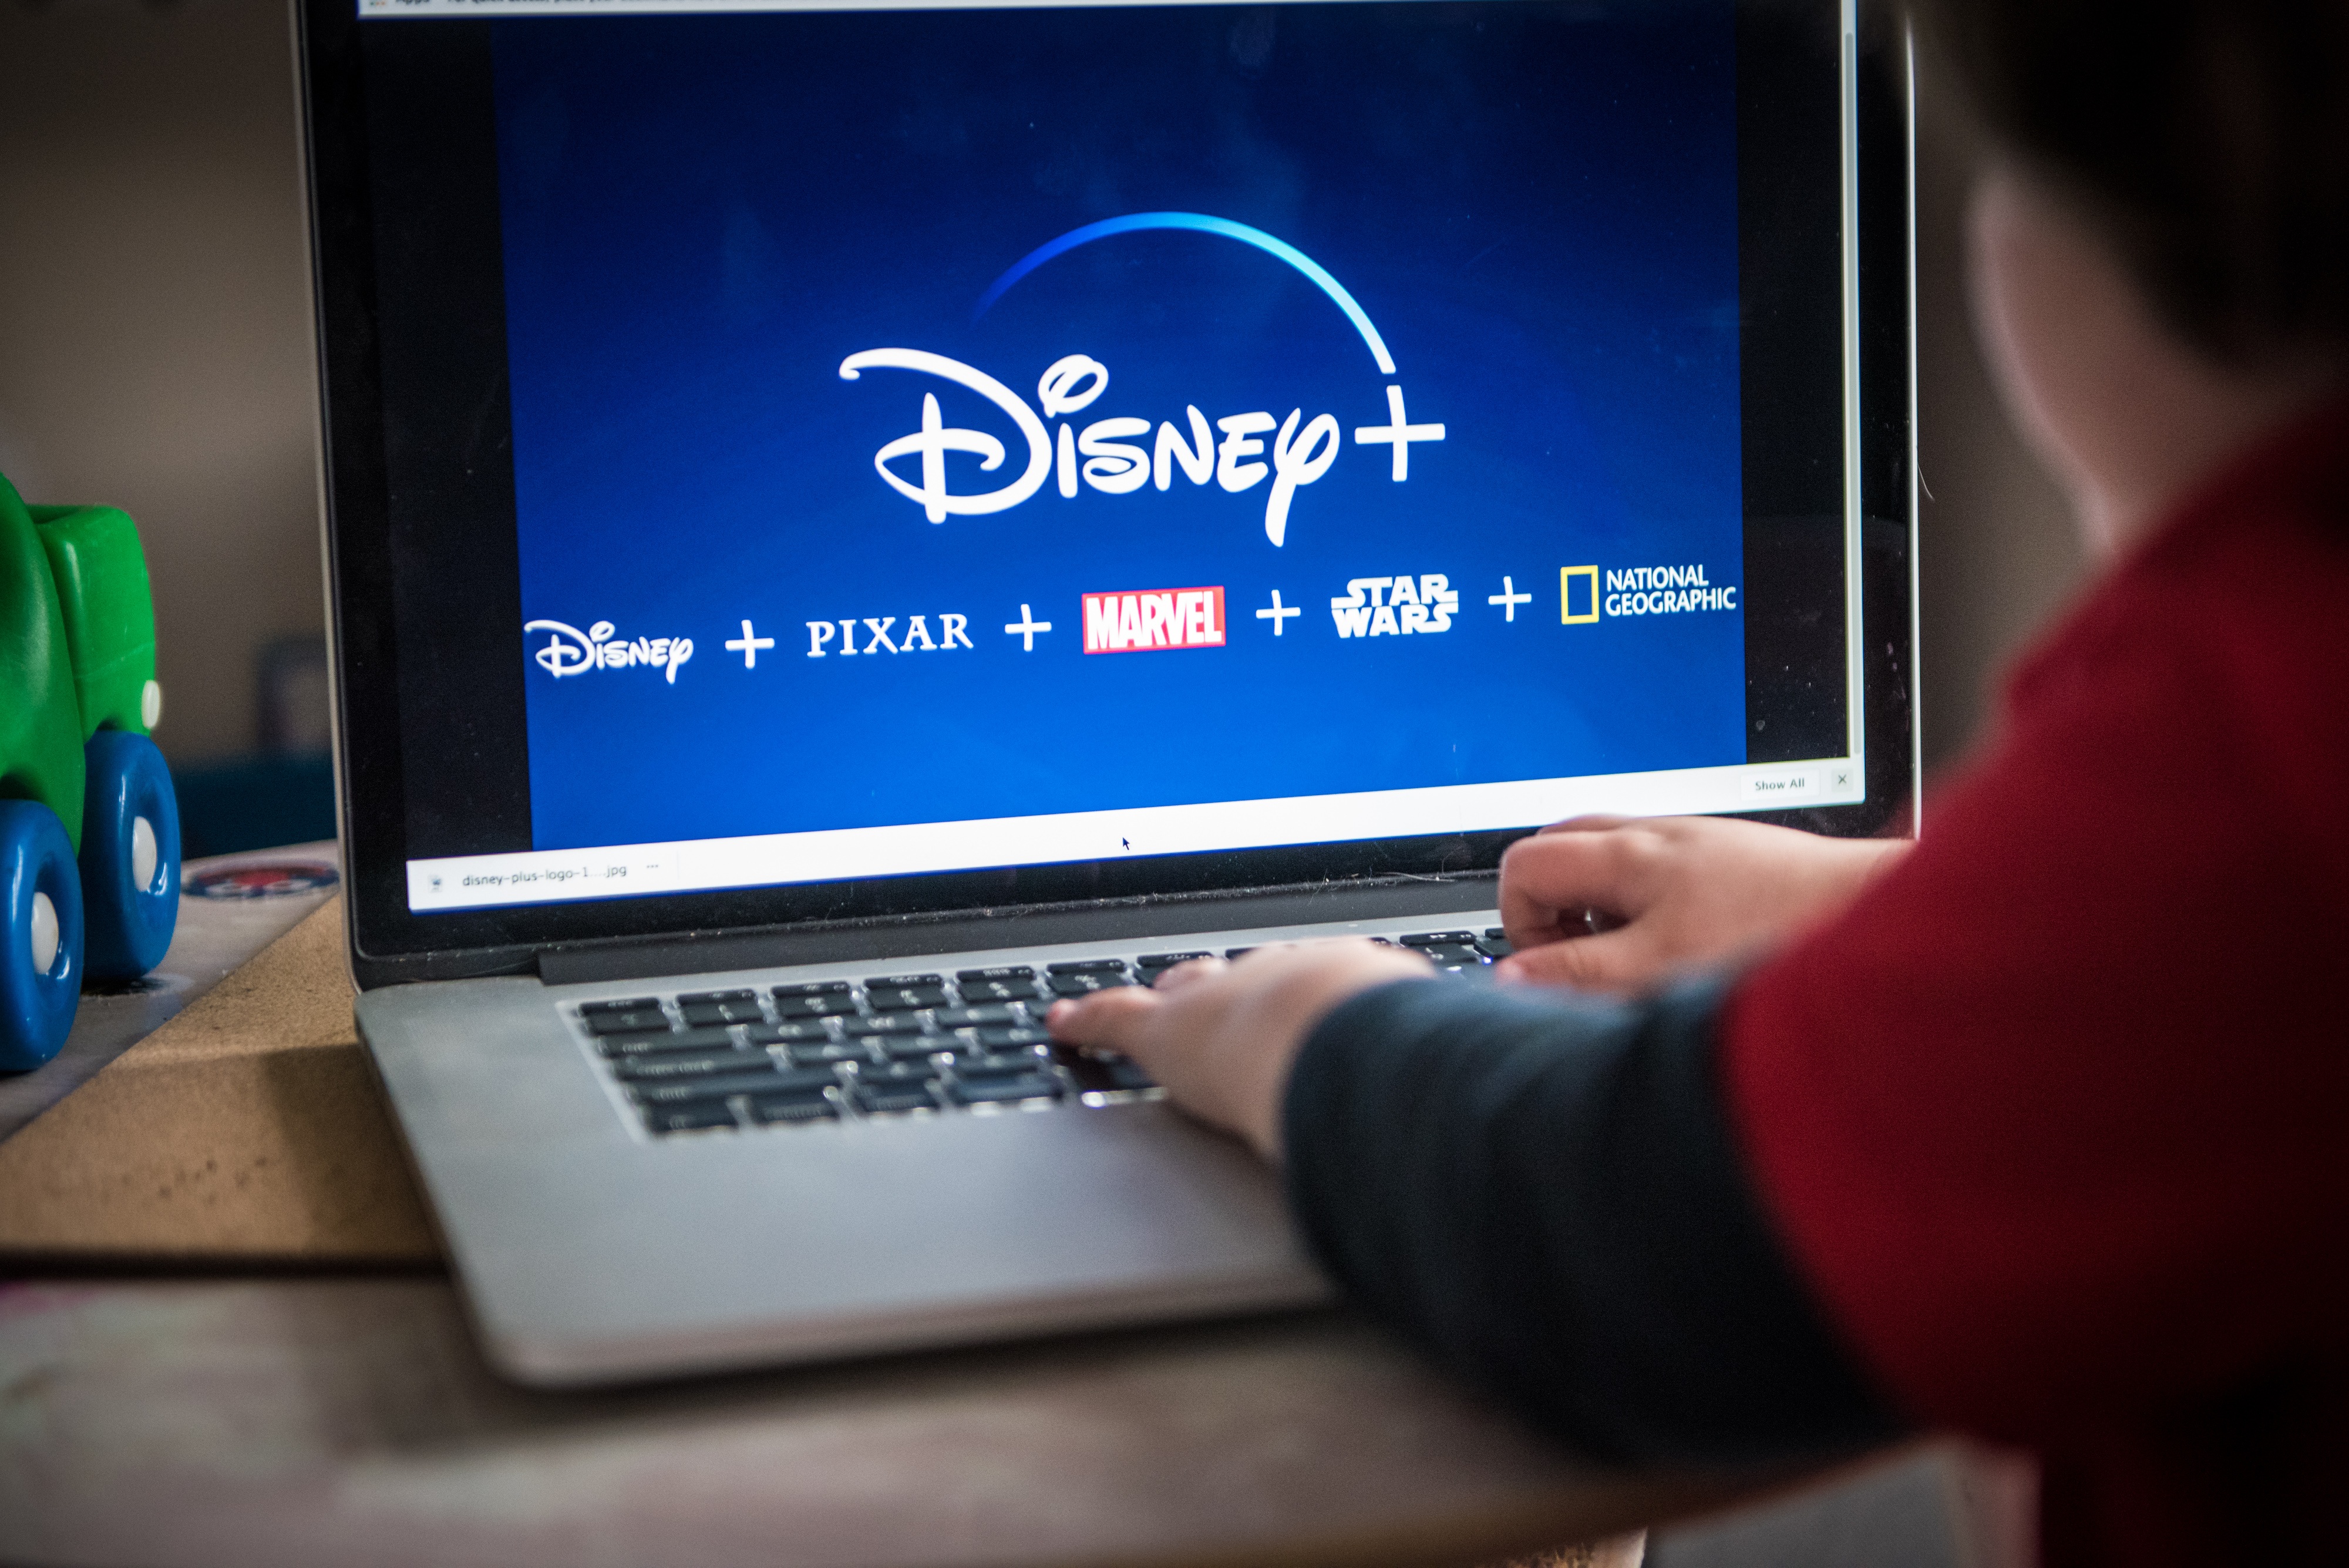 Deal Alert! Get Disney+ & Hulu for $2.99 a Month for 12 Months (Ends Soon)